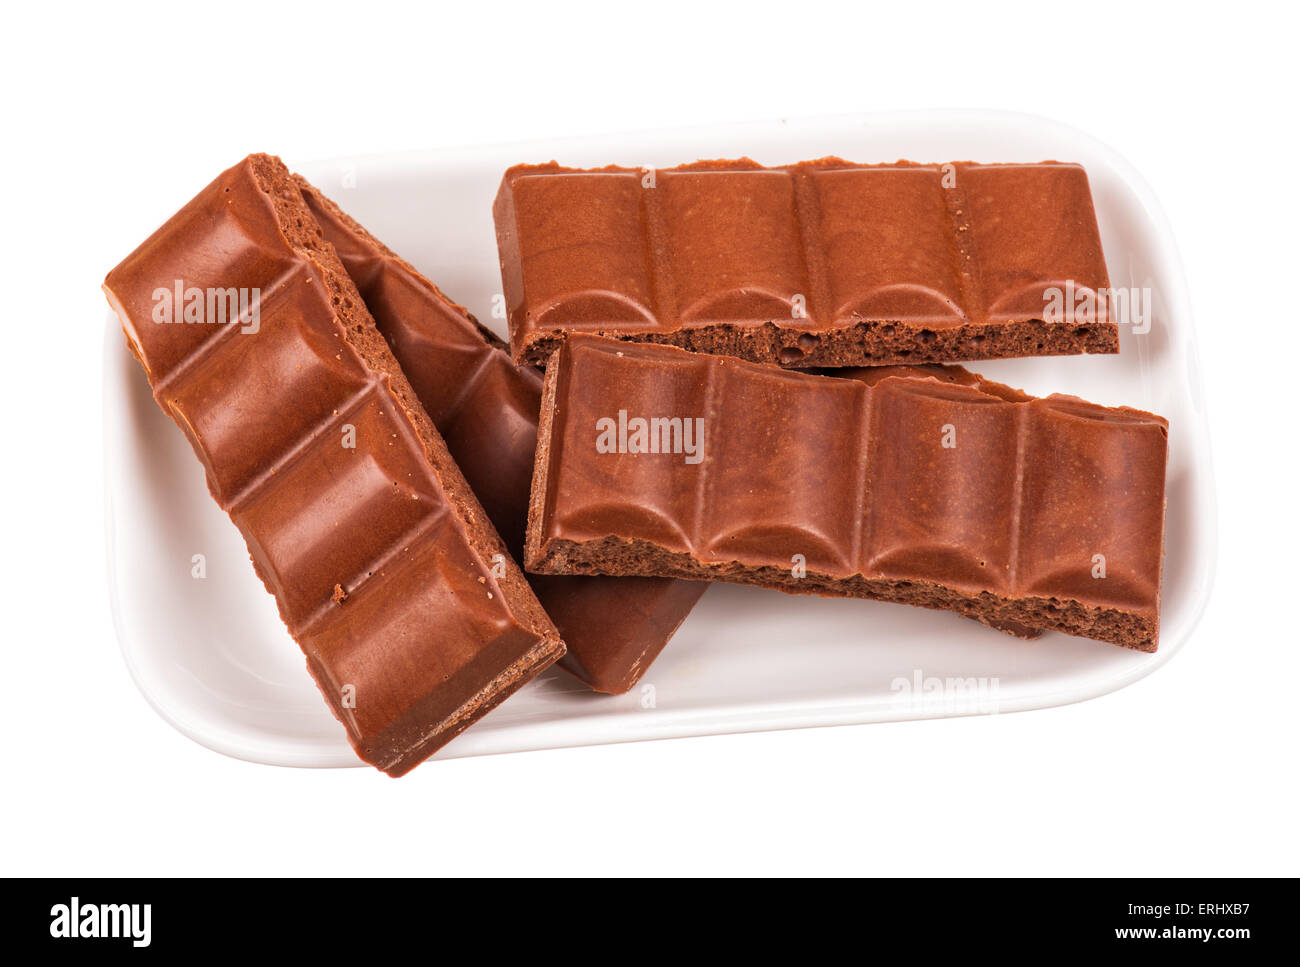 chocolate bar in a dish on white Stock Photo